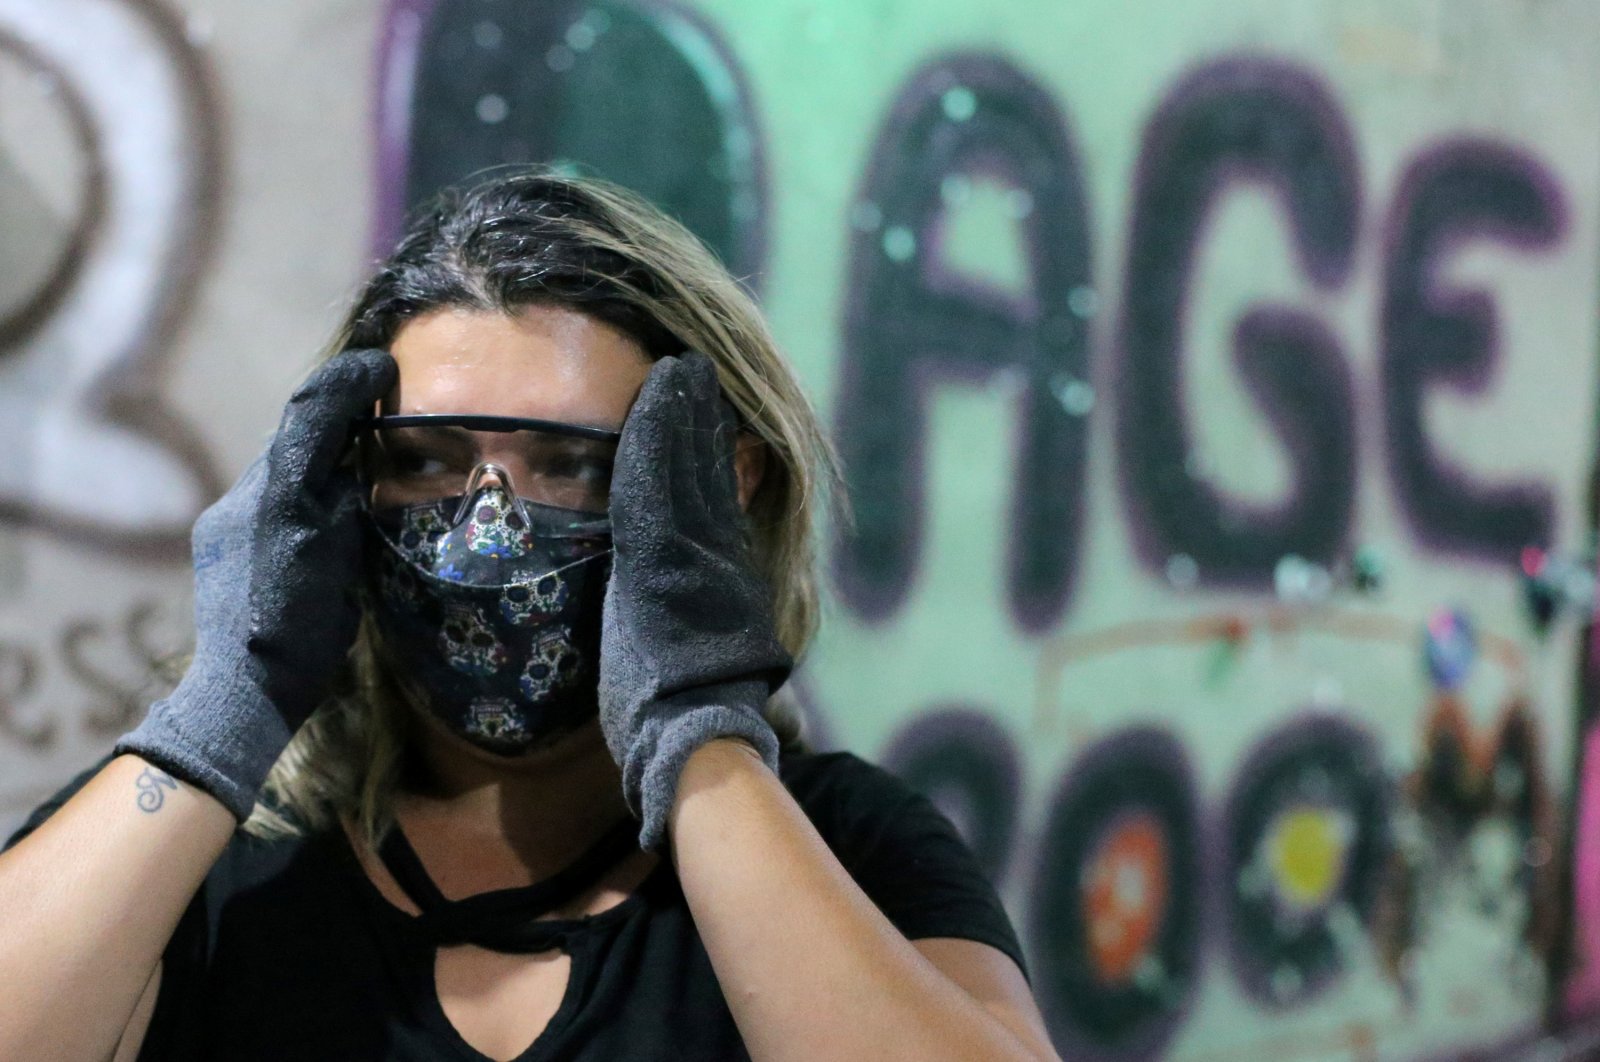 Luciana Holanda gets ready to use the Rage Room, a place where people can vent their anger on everyday items, such as bottles, broken TV sets and other electronic devices, in Sao Paulo, Brazil, Feb. 19, 2021. (Reuters Photo)